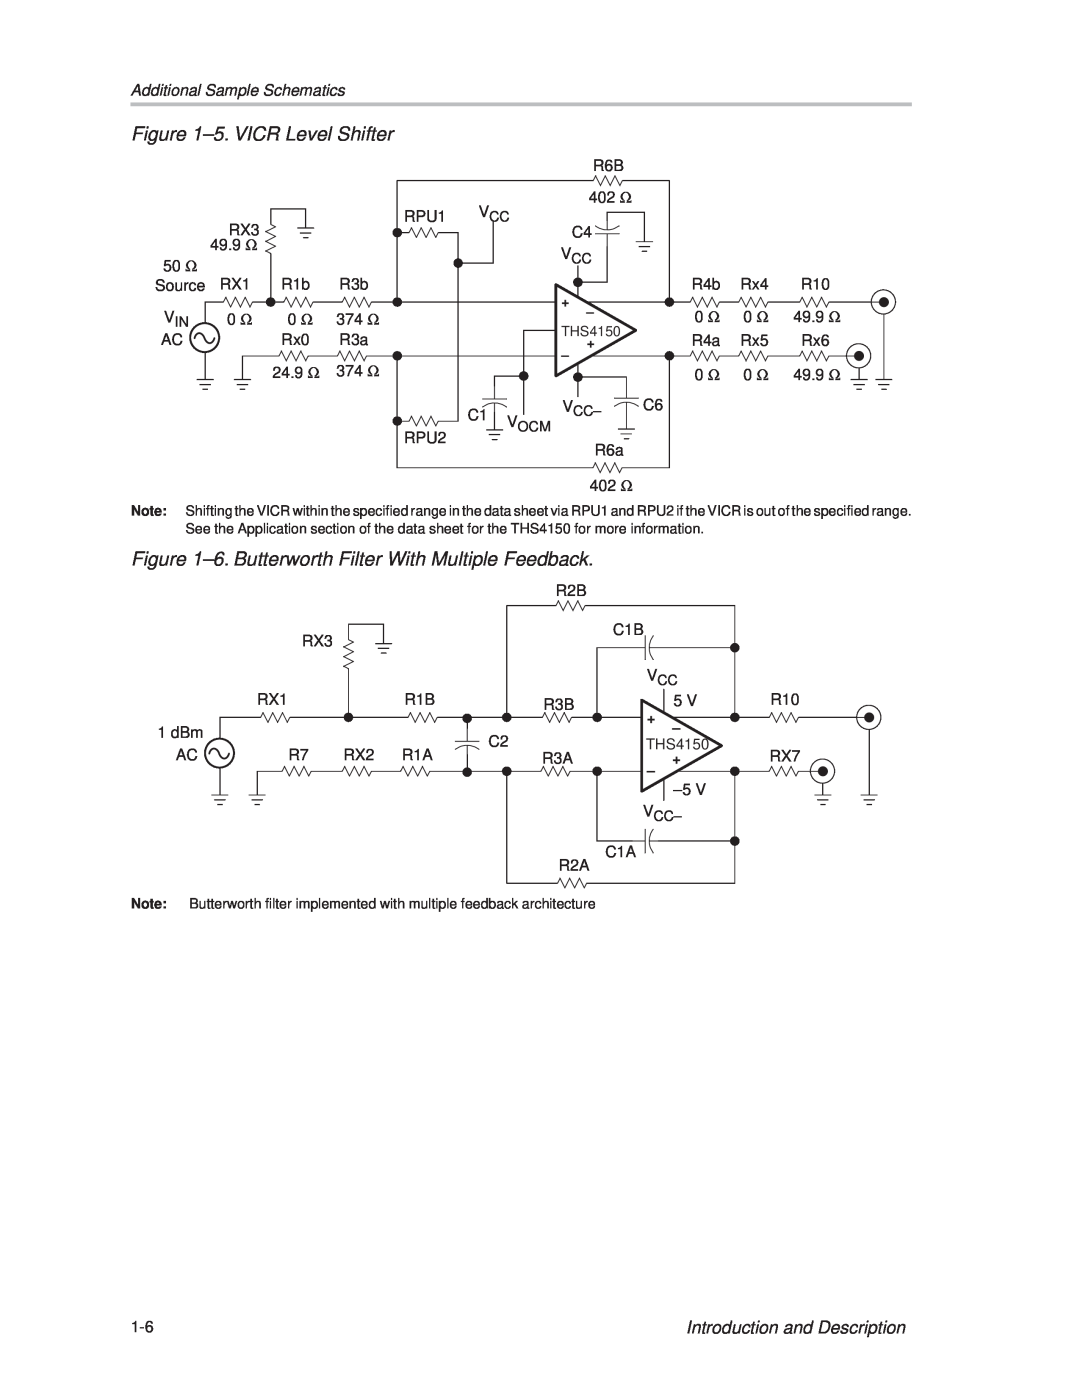 Texas Instruments THS4150 manual ±5. VICR Level Shifter, Introduction and Description, Additional Sample Schematics 